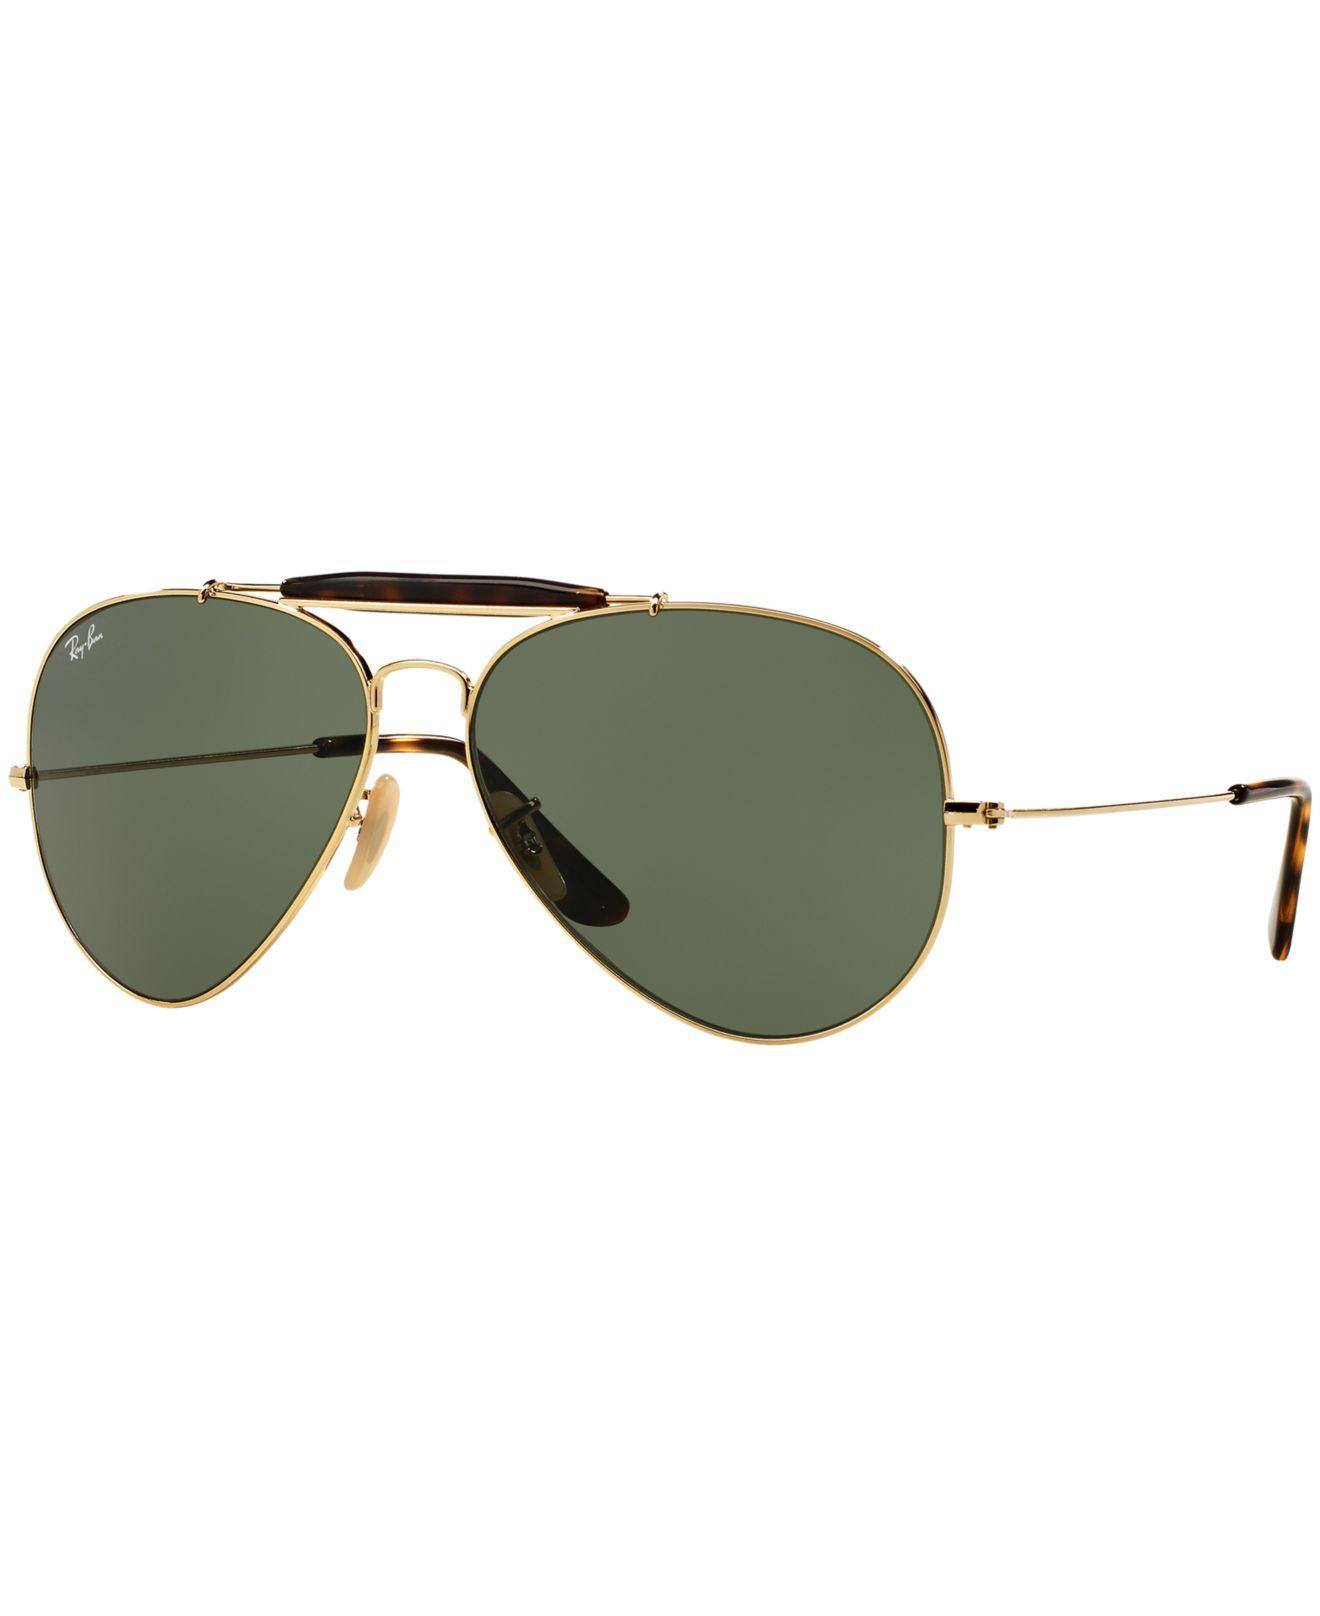 Lyst - Ray-Ban Sunglasses, Rb3029 62 Outdoorsman Ii in Metallic for Men